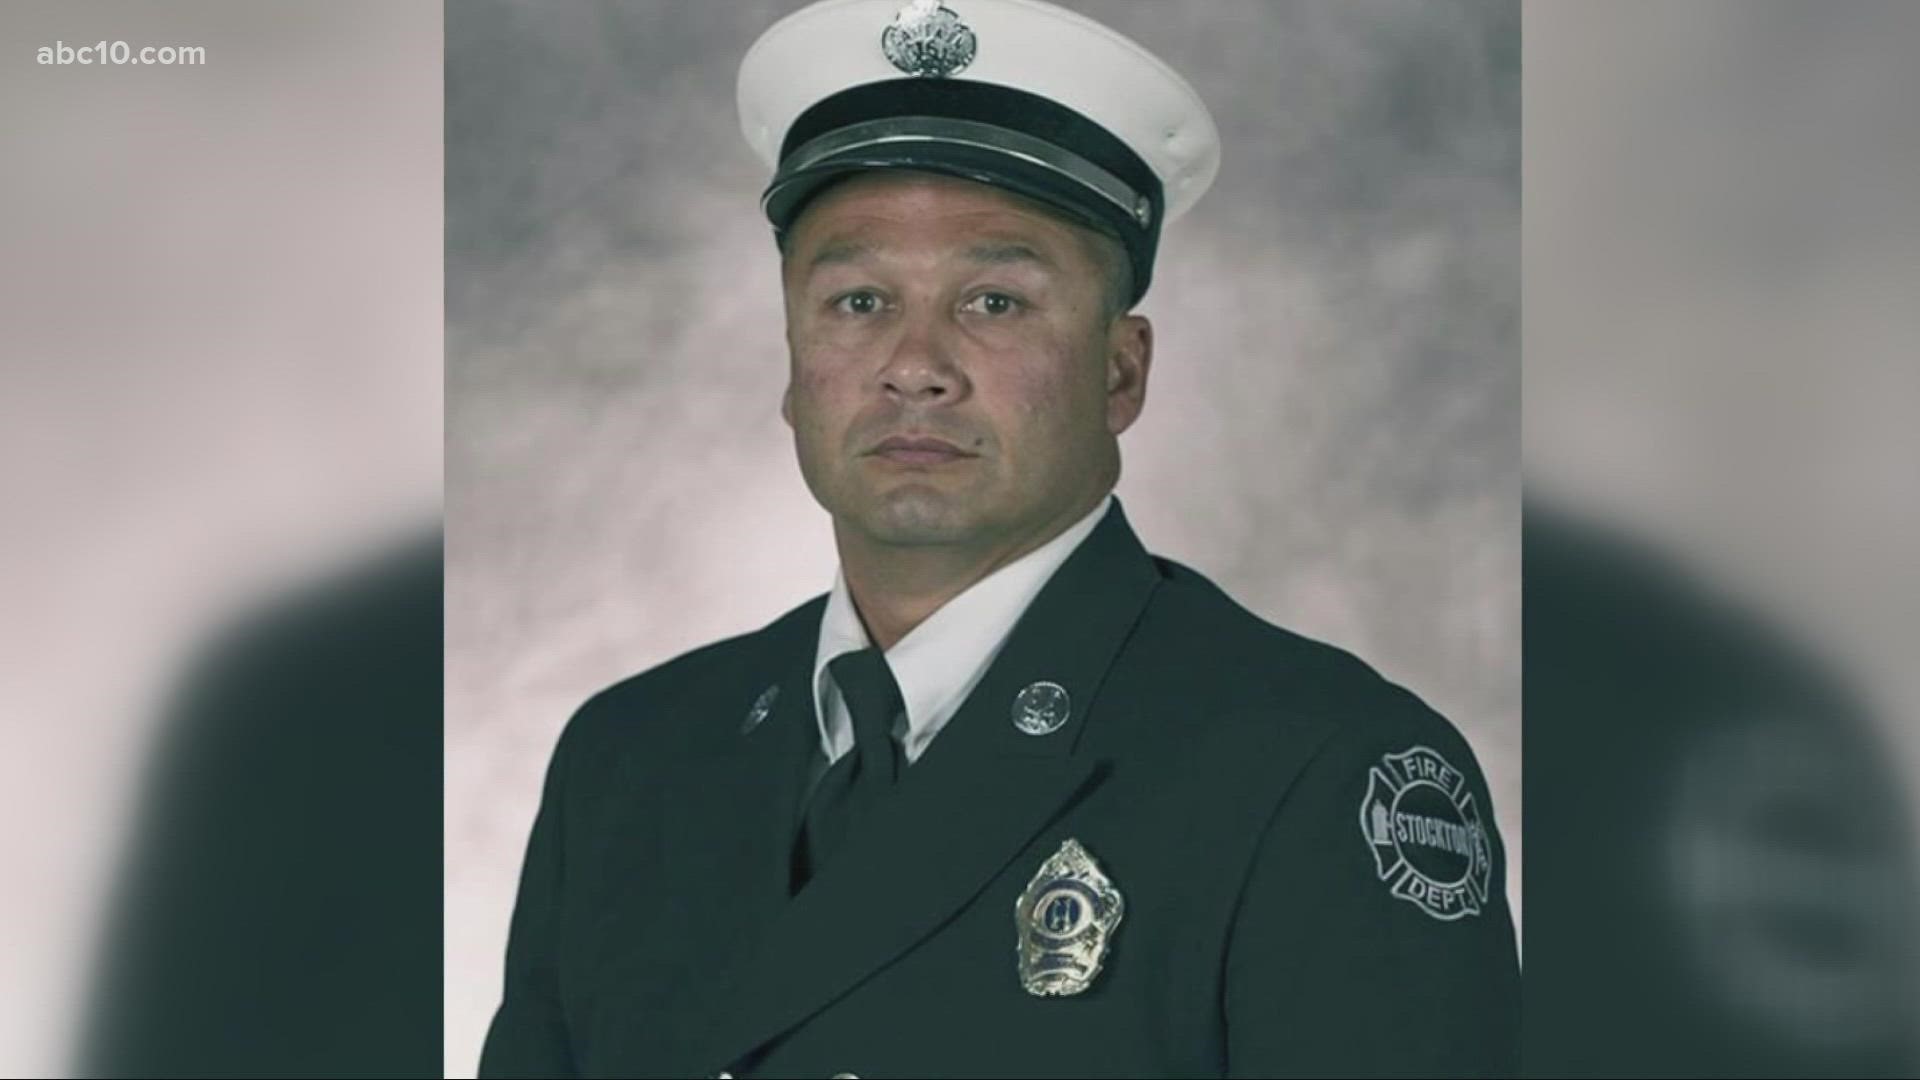 A 21-year veteran of the Stockton Fire Department, Vidal "Max" Fortuna, died Monday morning after being shot while responding to a dumpster fire.